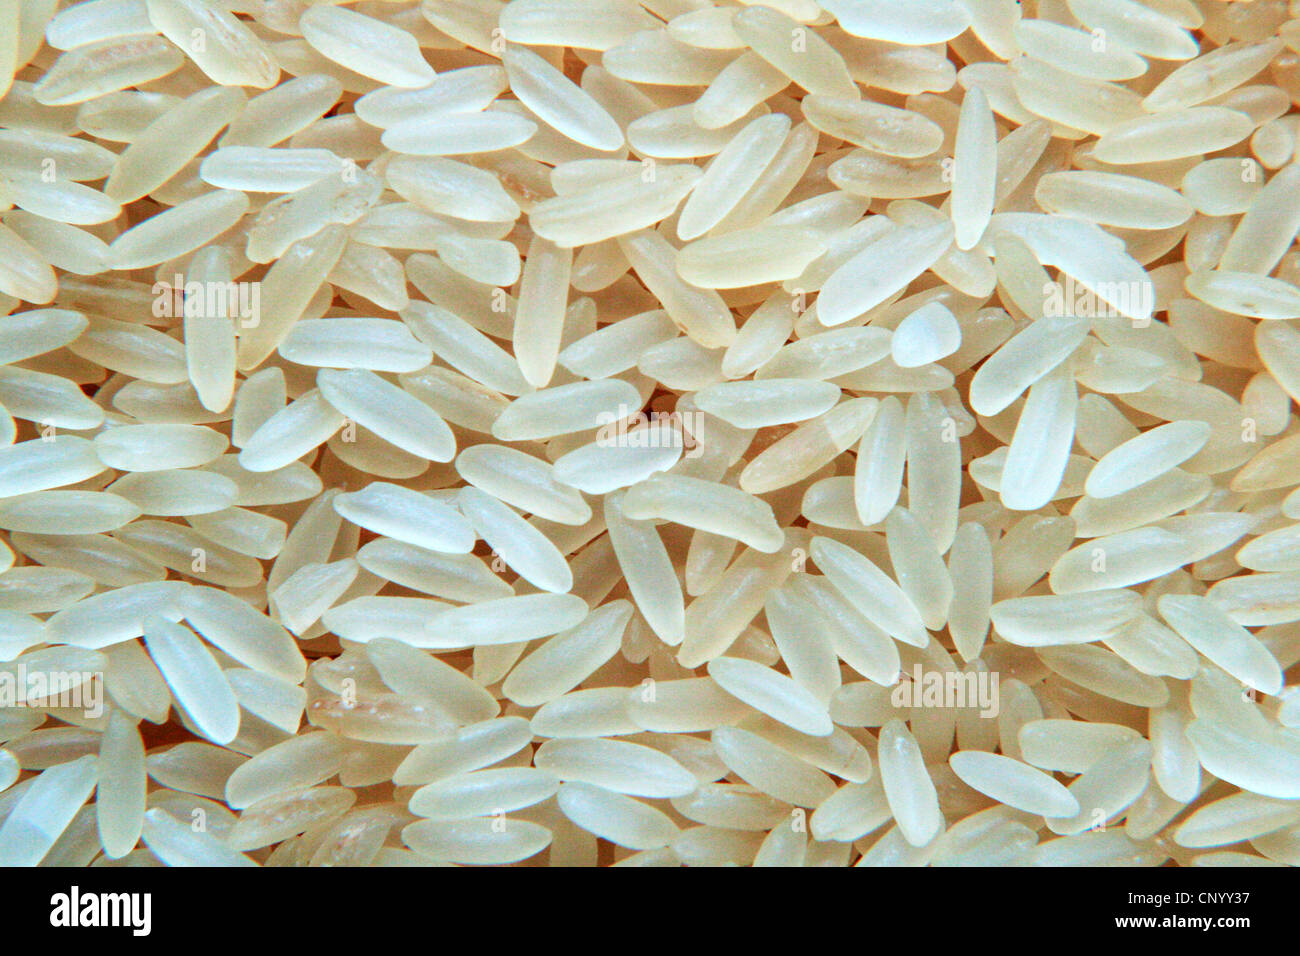 Oryza Sativa Grains High Resolution Stock Photography and Images - Alamy